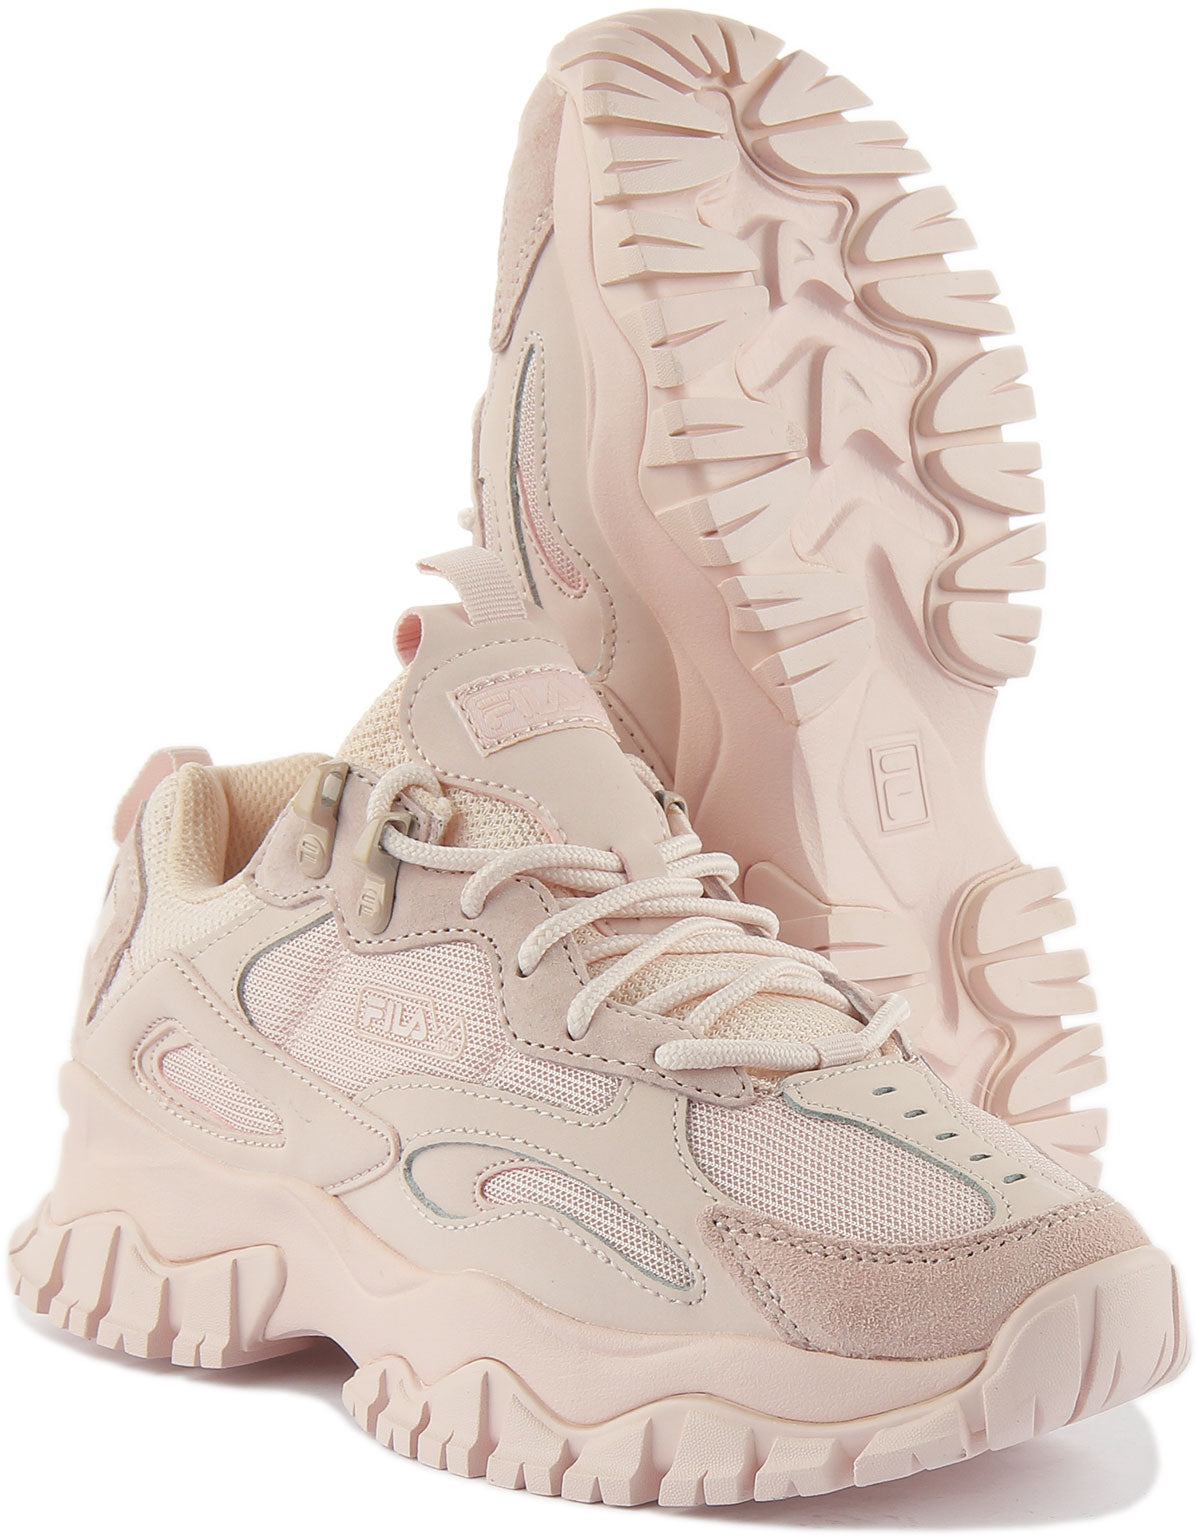 Fila Ray Tracer 2 In Rose For Women